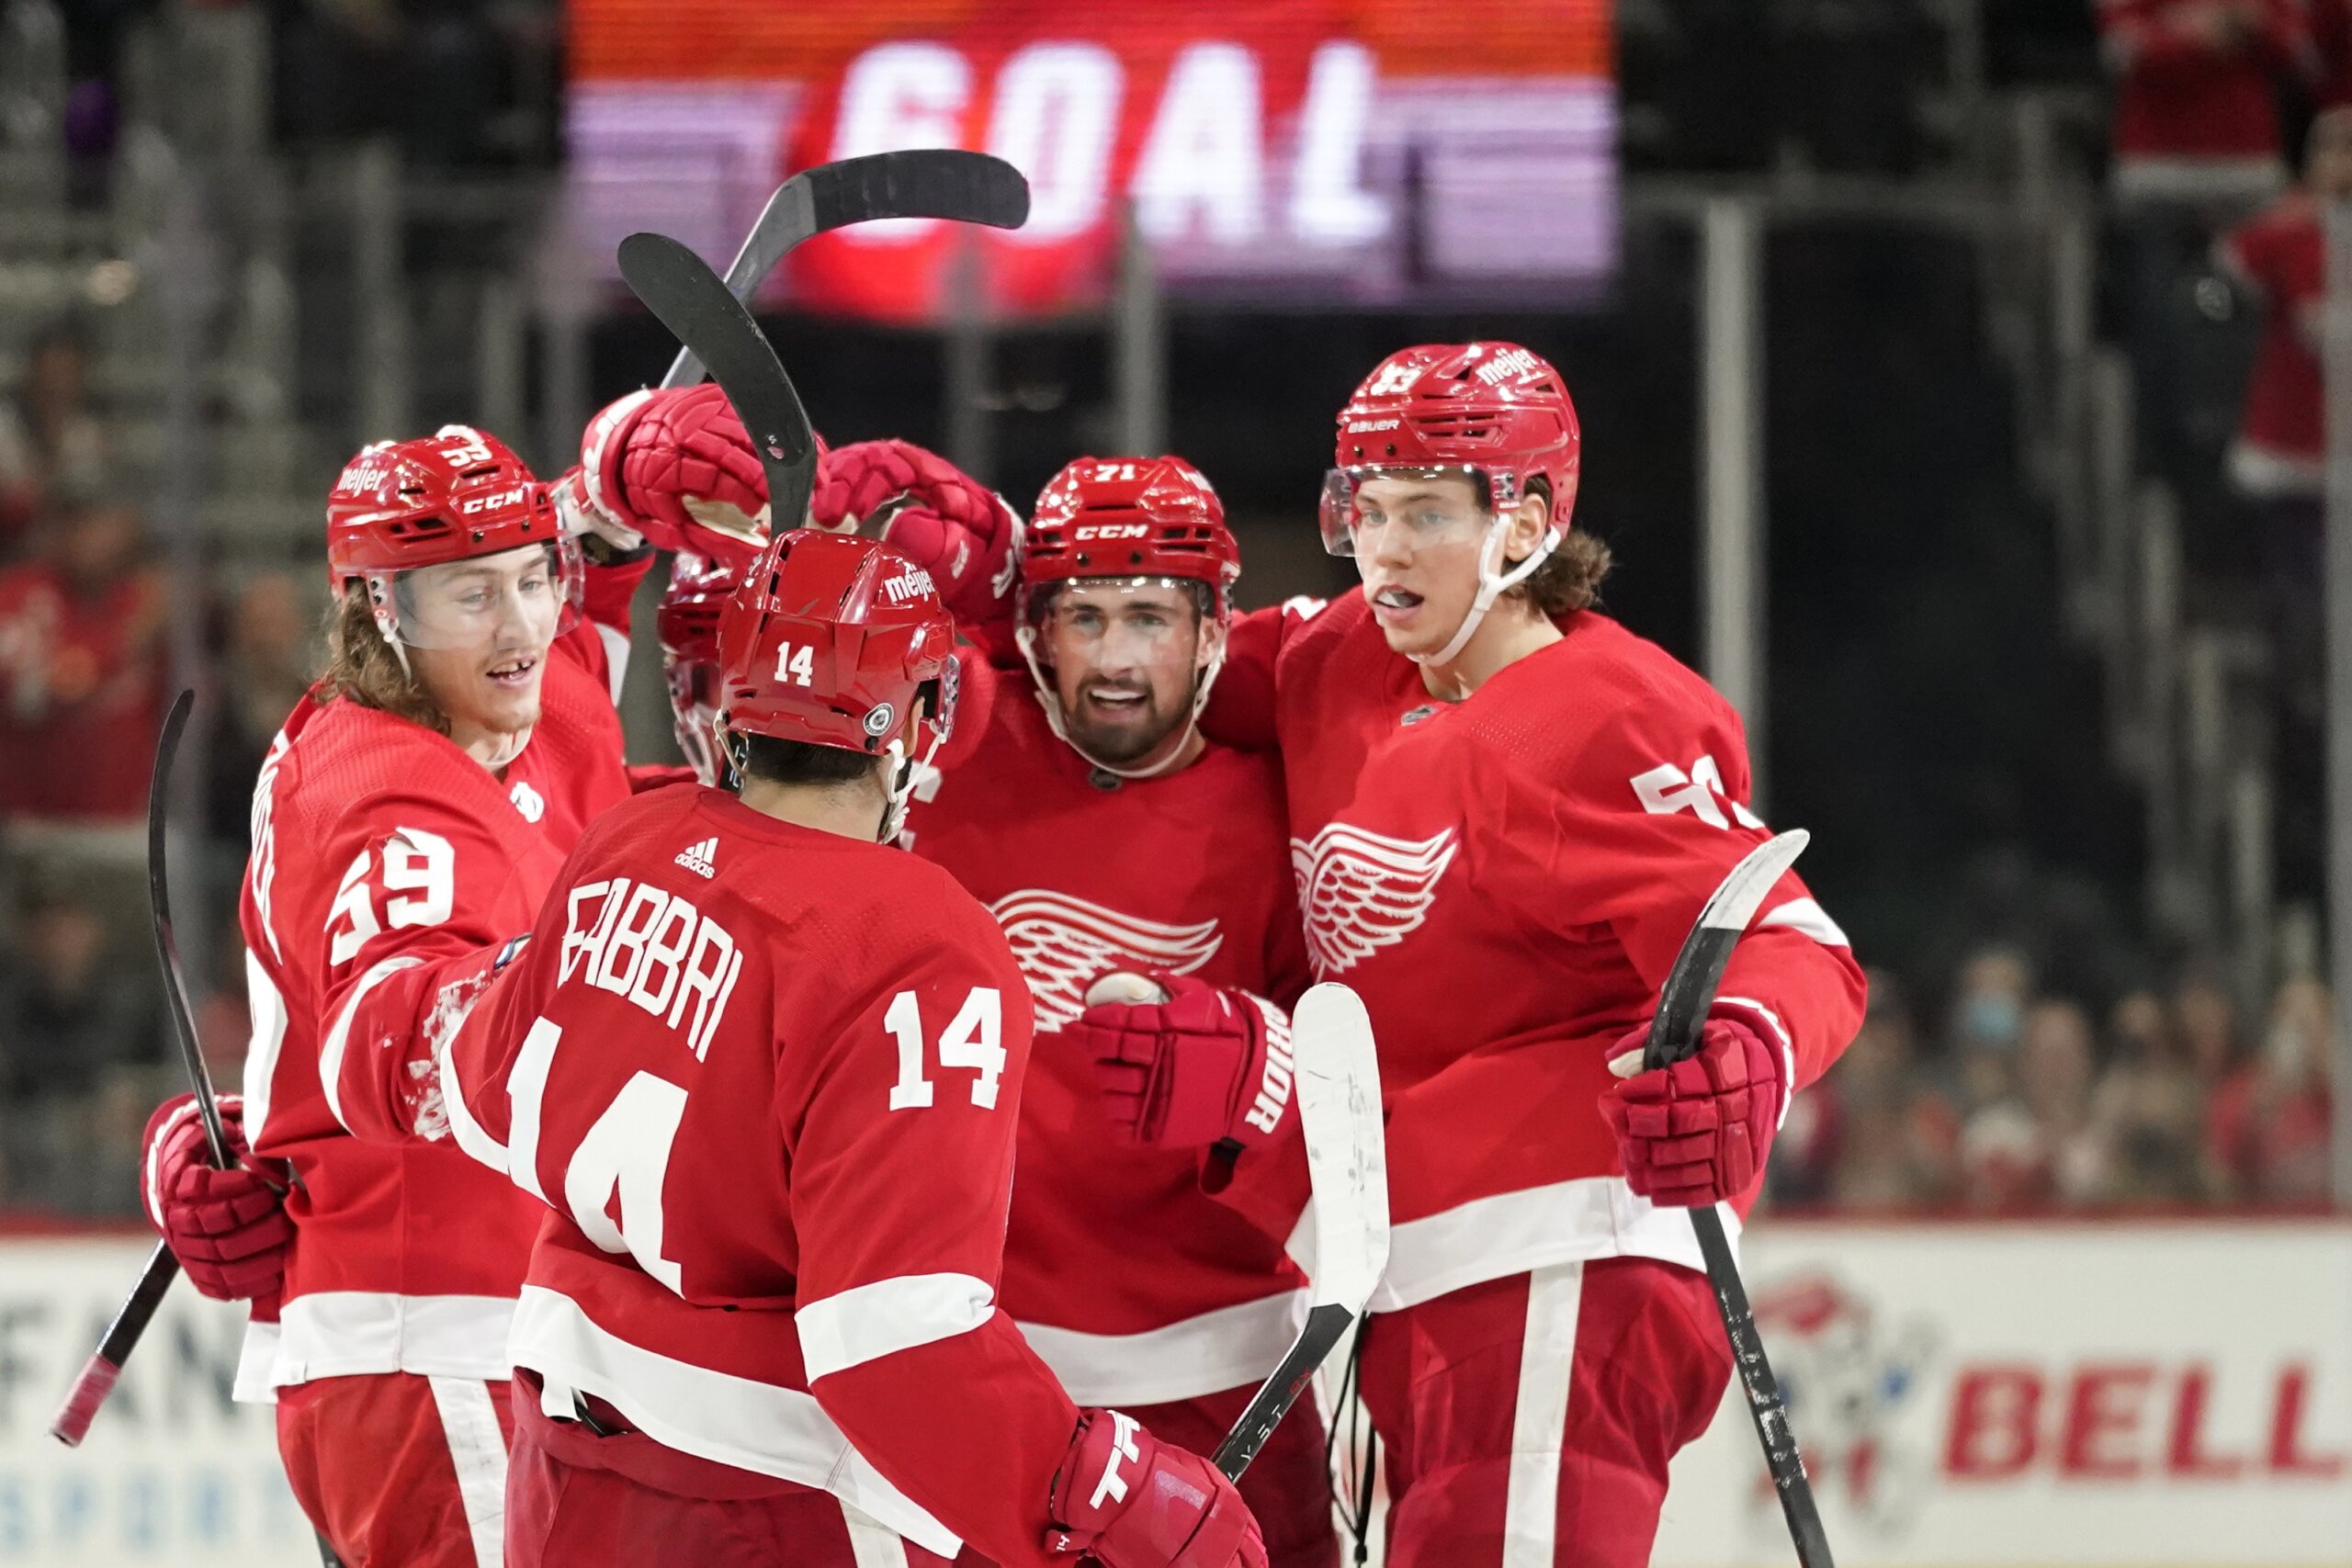 Raymond's OT goal lifts Red Wings past Hurricanes, 4-3